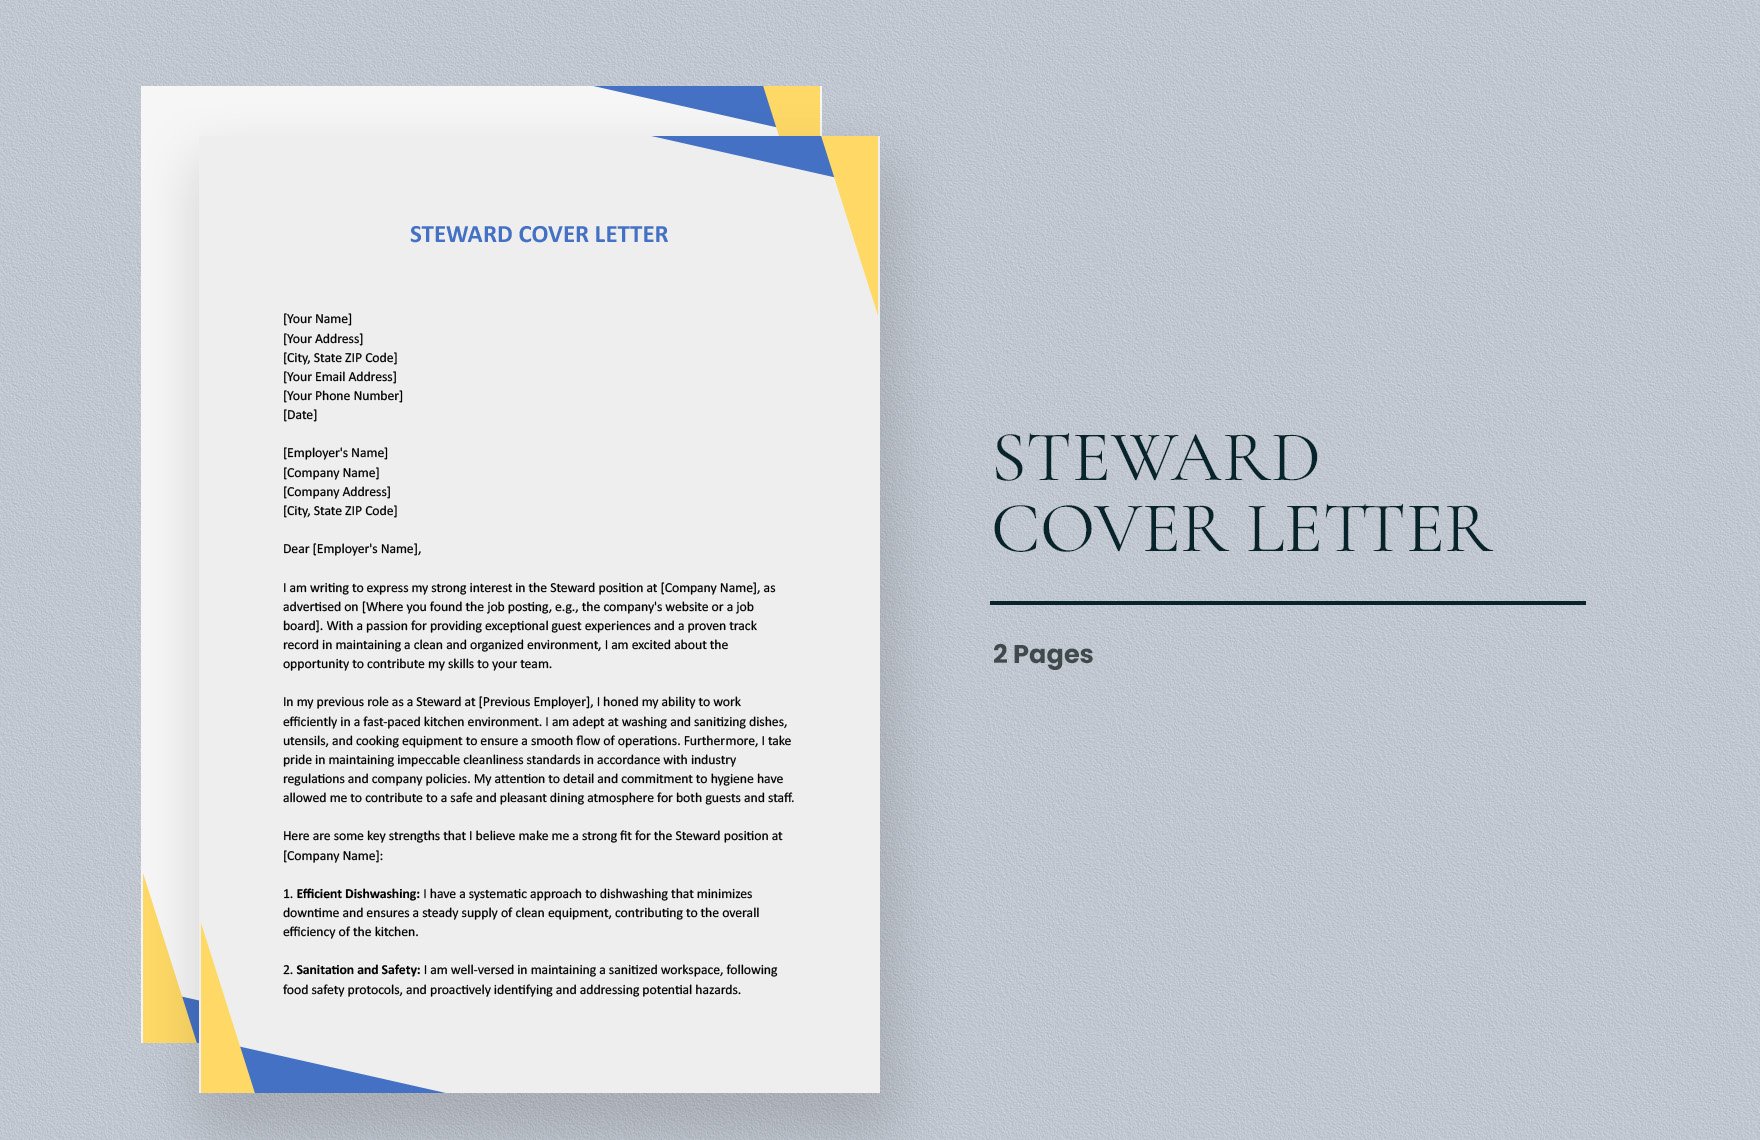 Steward Cover Letter in Word, Google Docs, Apple Pages